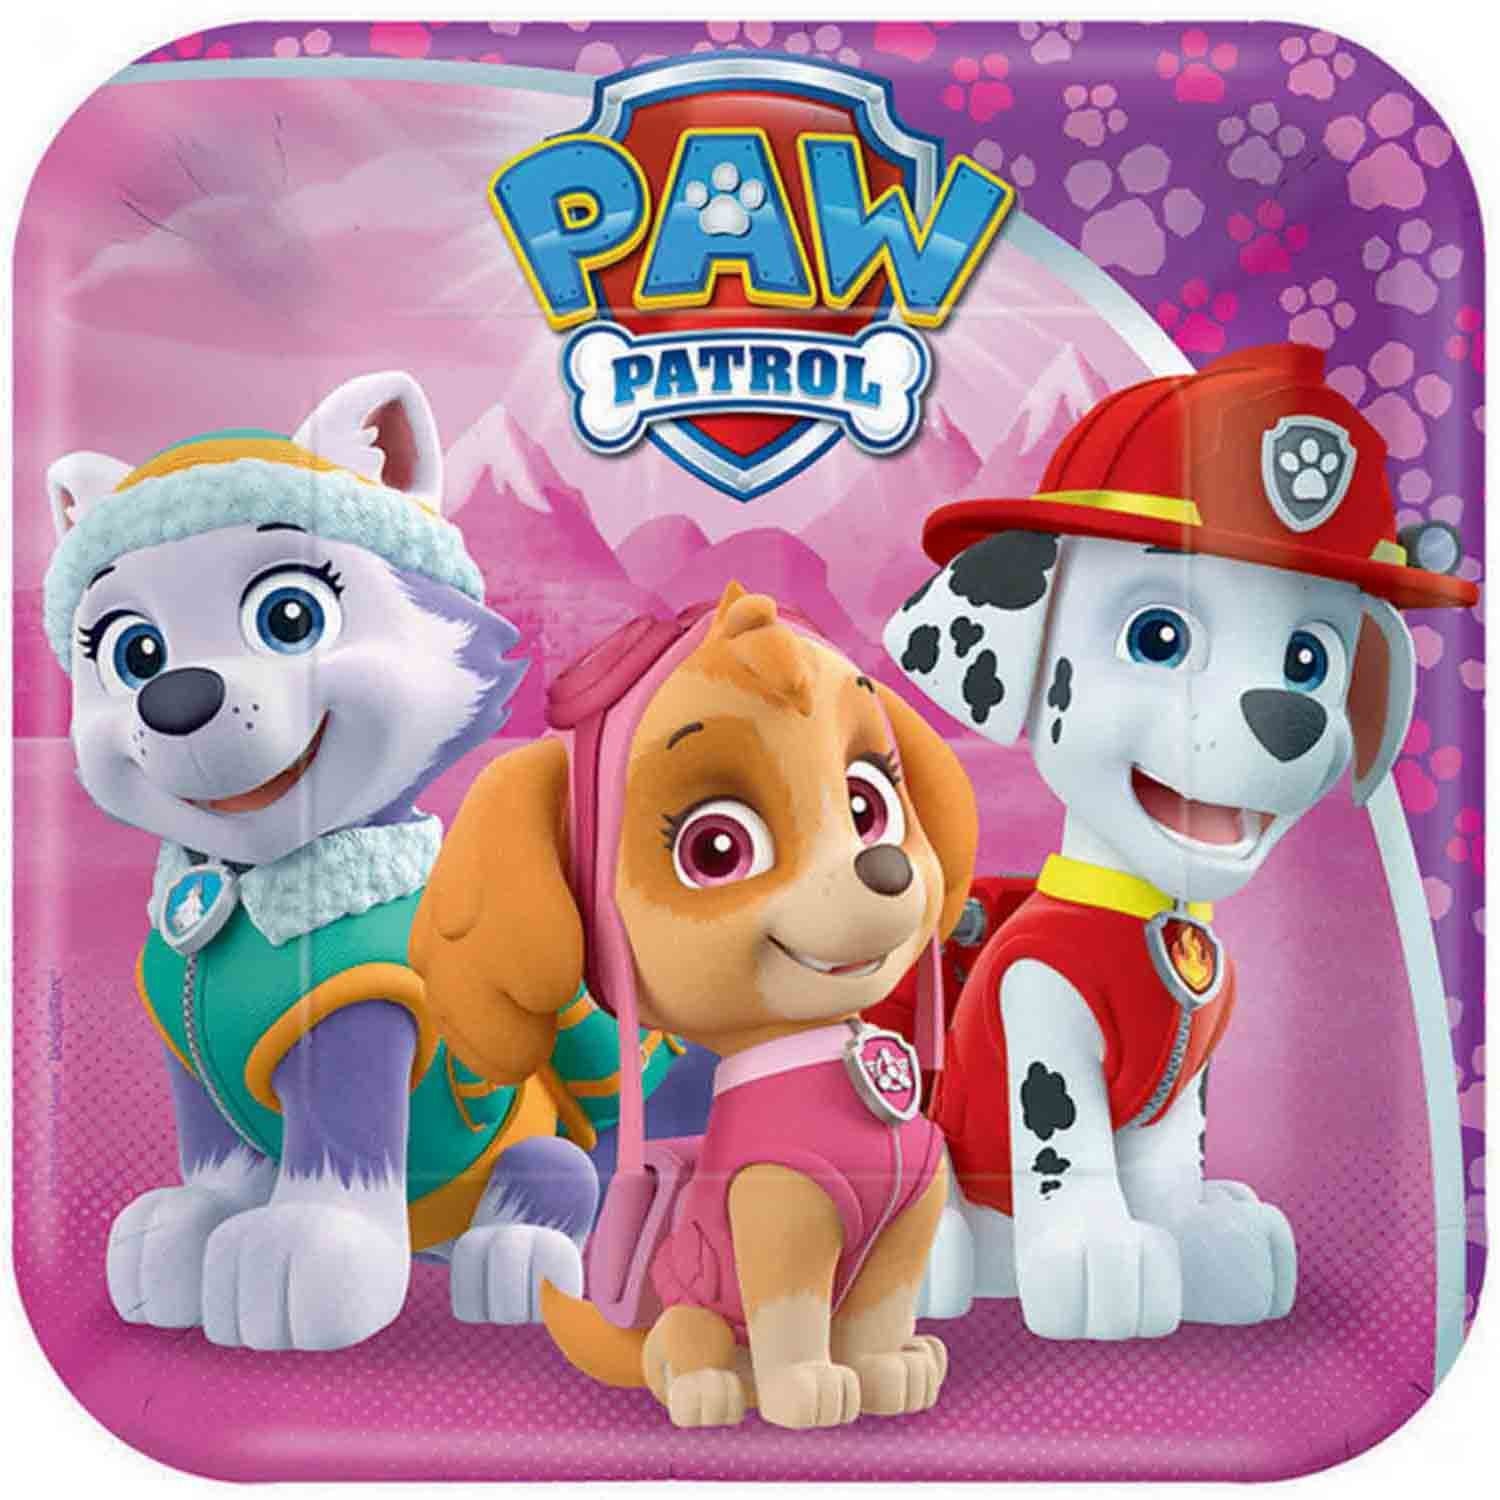 Paw Patrol Party Decorations for Girls